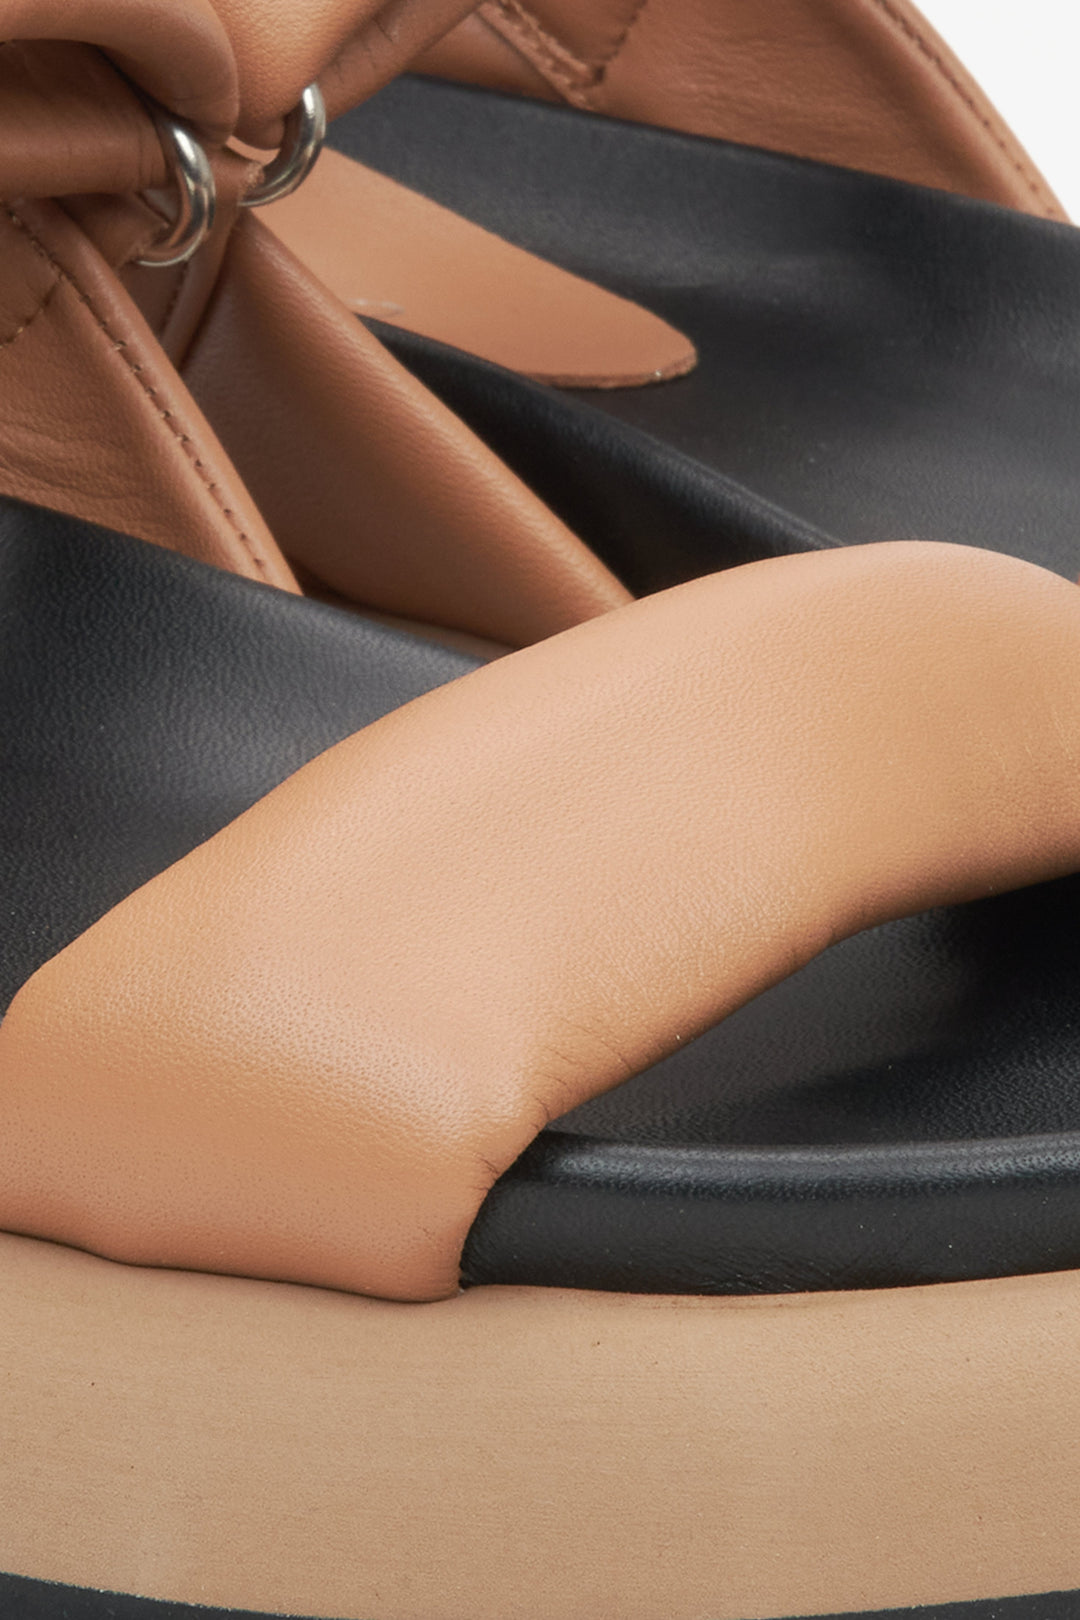 Women's brown leather sandals by Estro - close-up on the details.